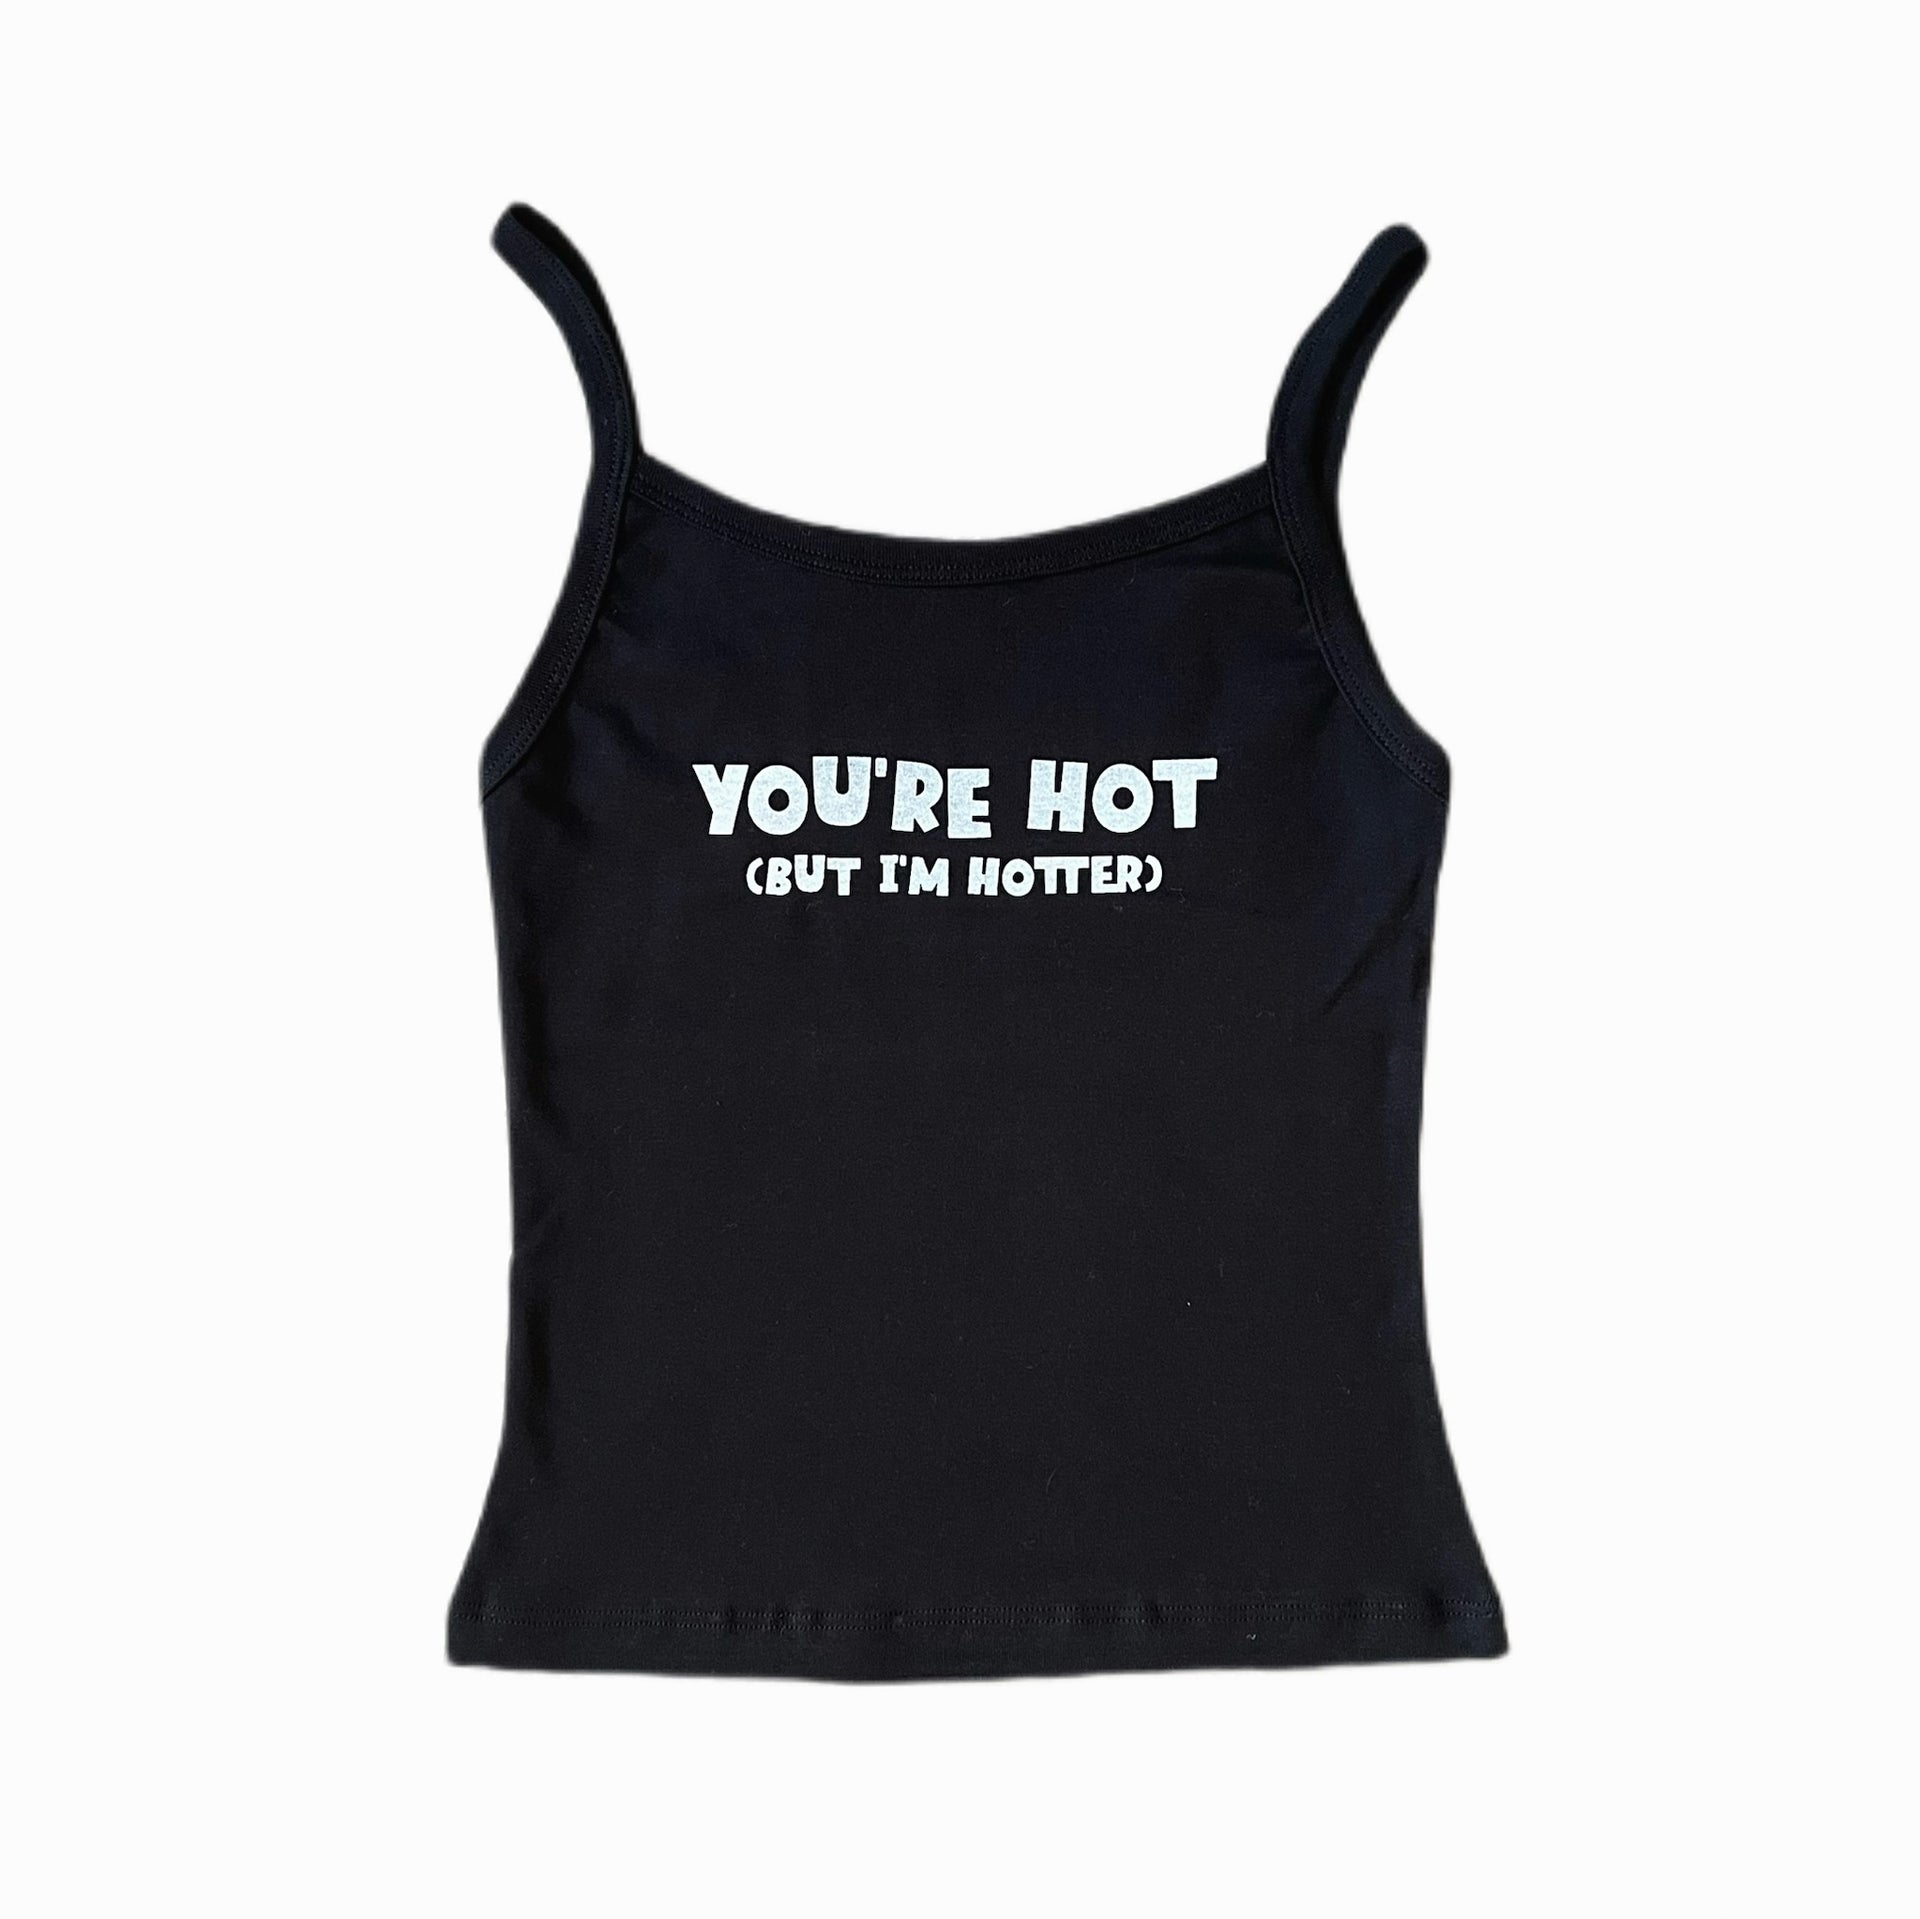 You're Hot BUT I'm Hotter tank